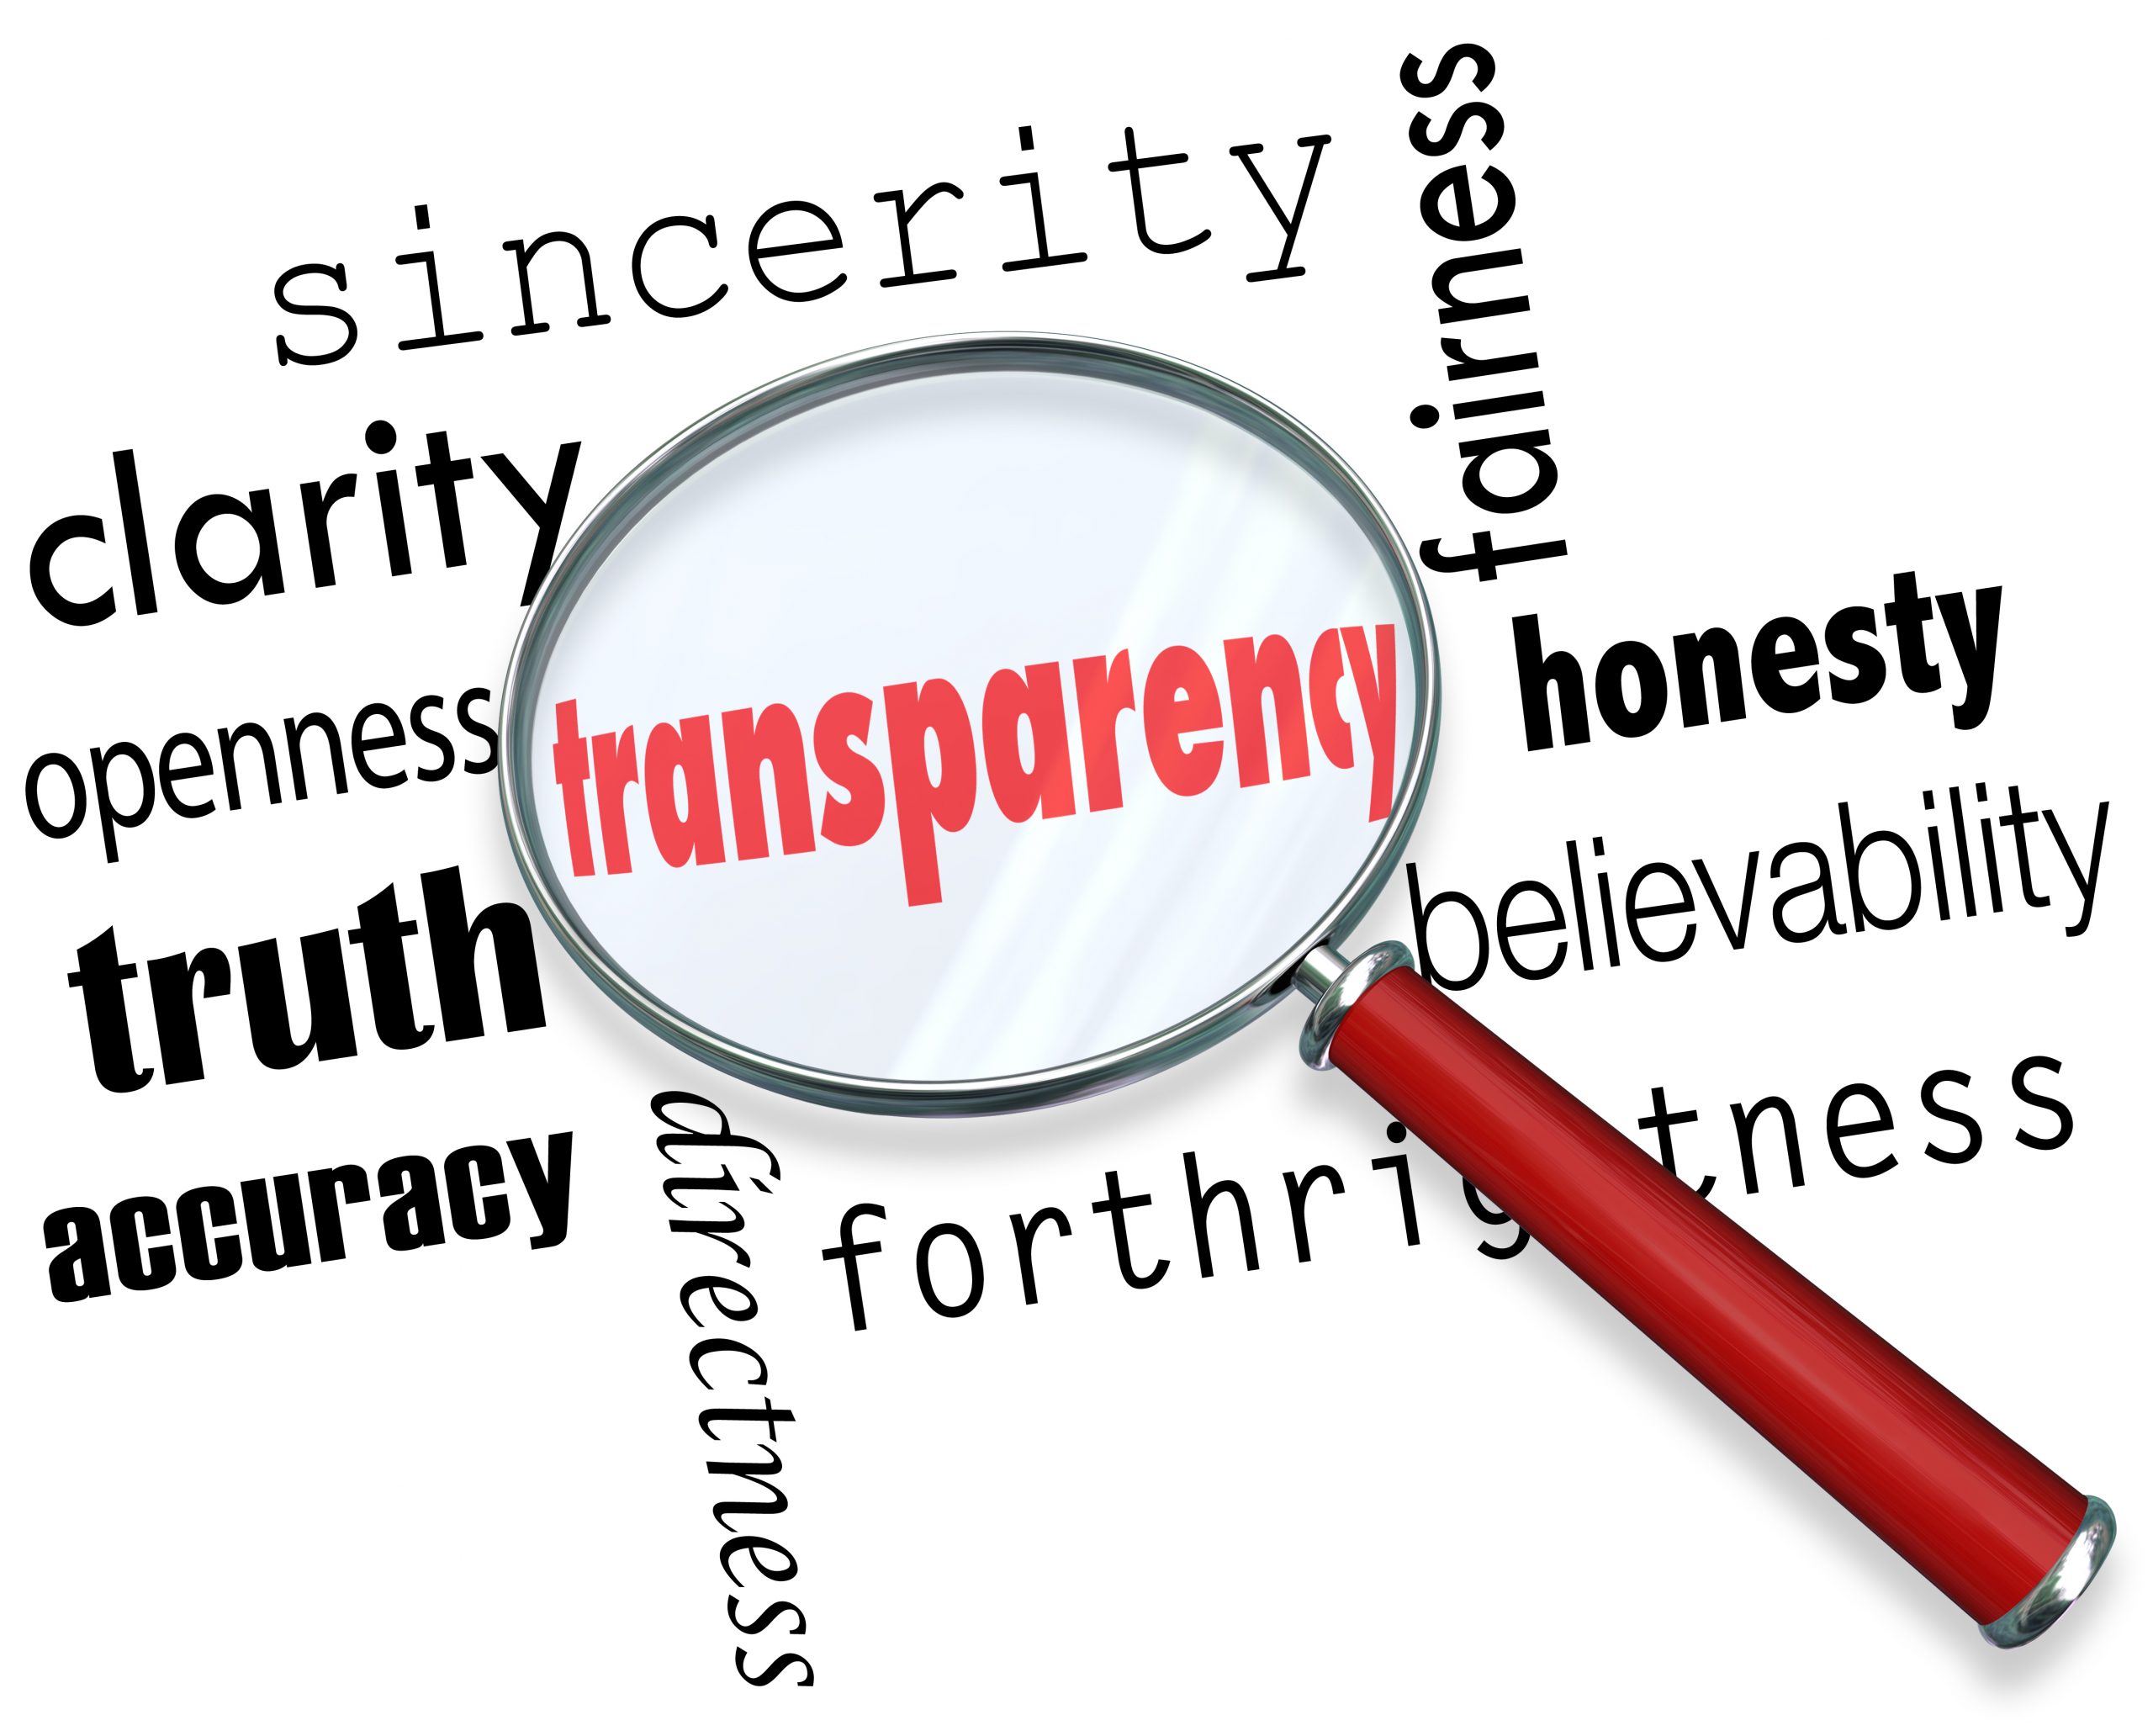 Transparency, trust - https://depositphotos.com/39072457/stock-photo-transparency-word-magnifying-glass-sincerity.html